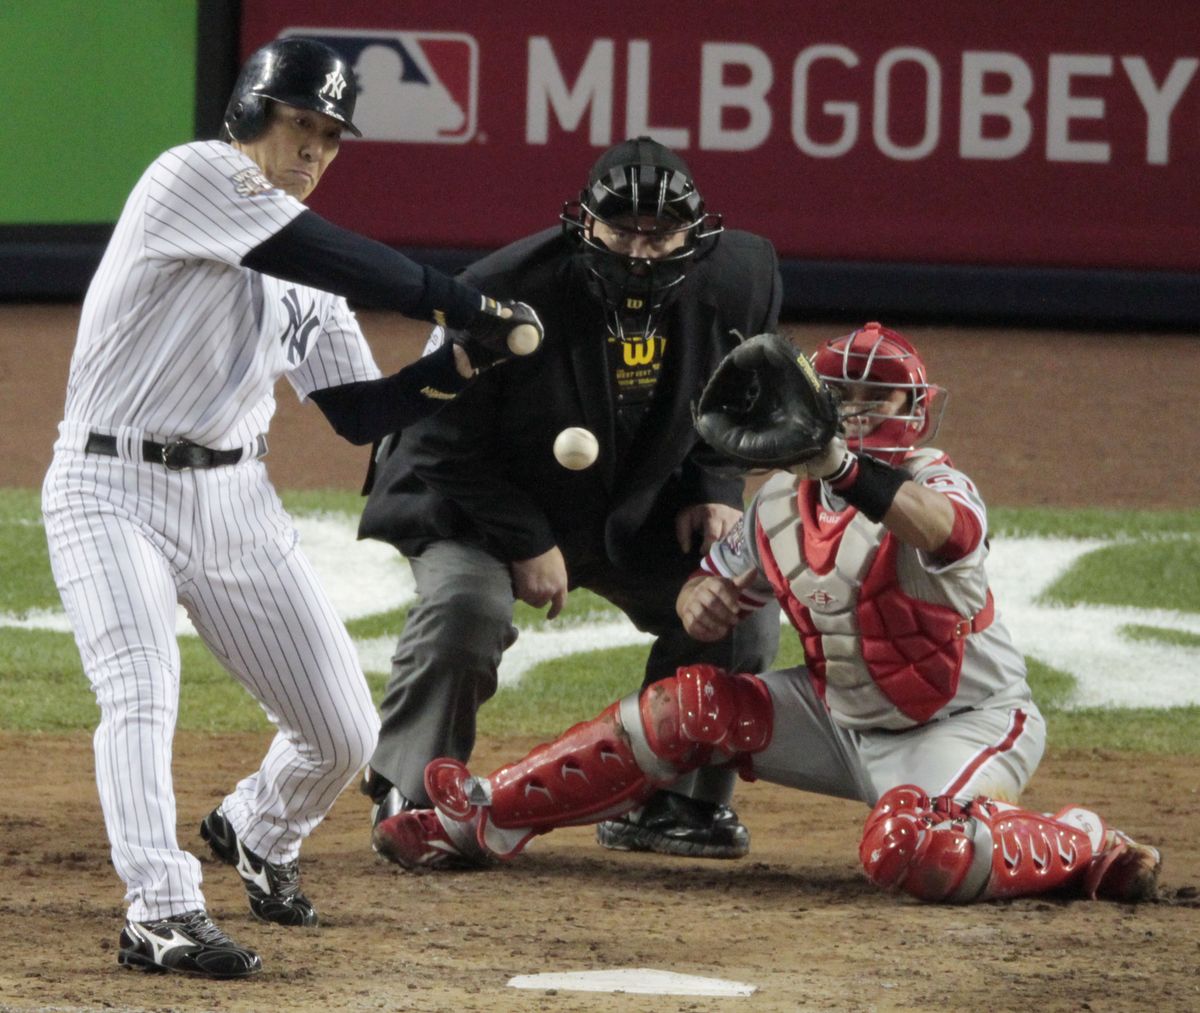 Series MVP Hideki Matsui connects for a two-run double in the fifth inning.   (Associated Press / The Spokesman-Review)